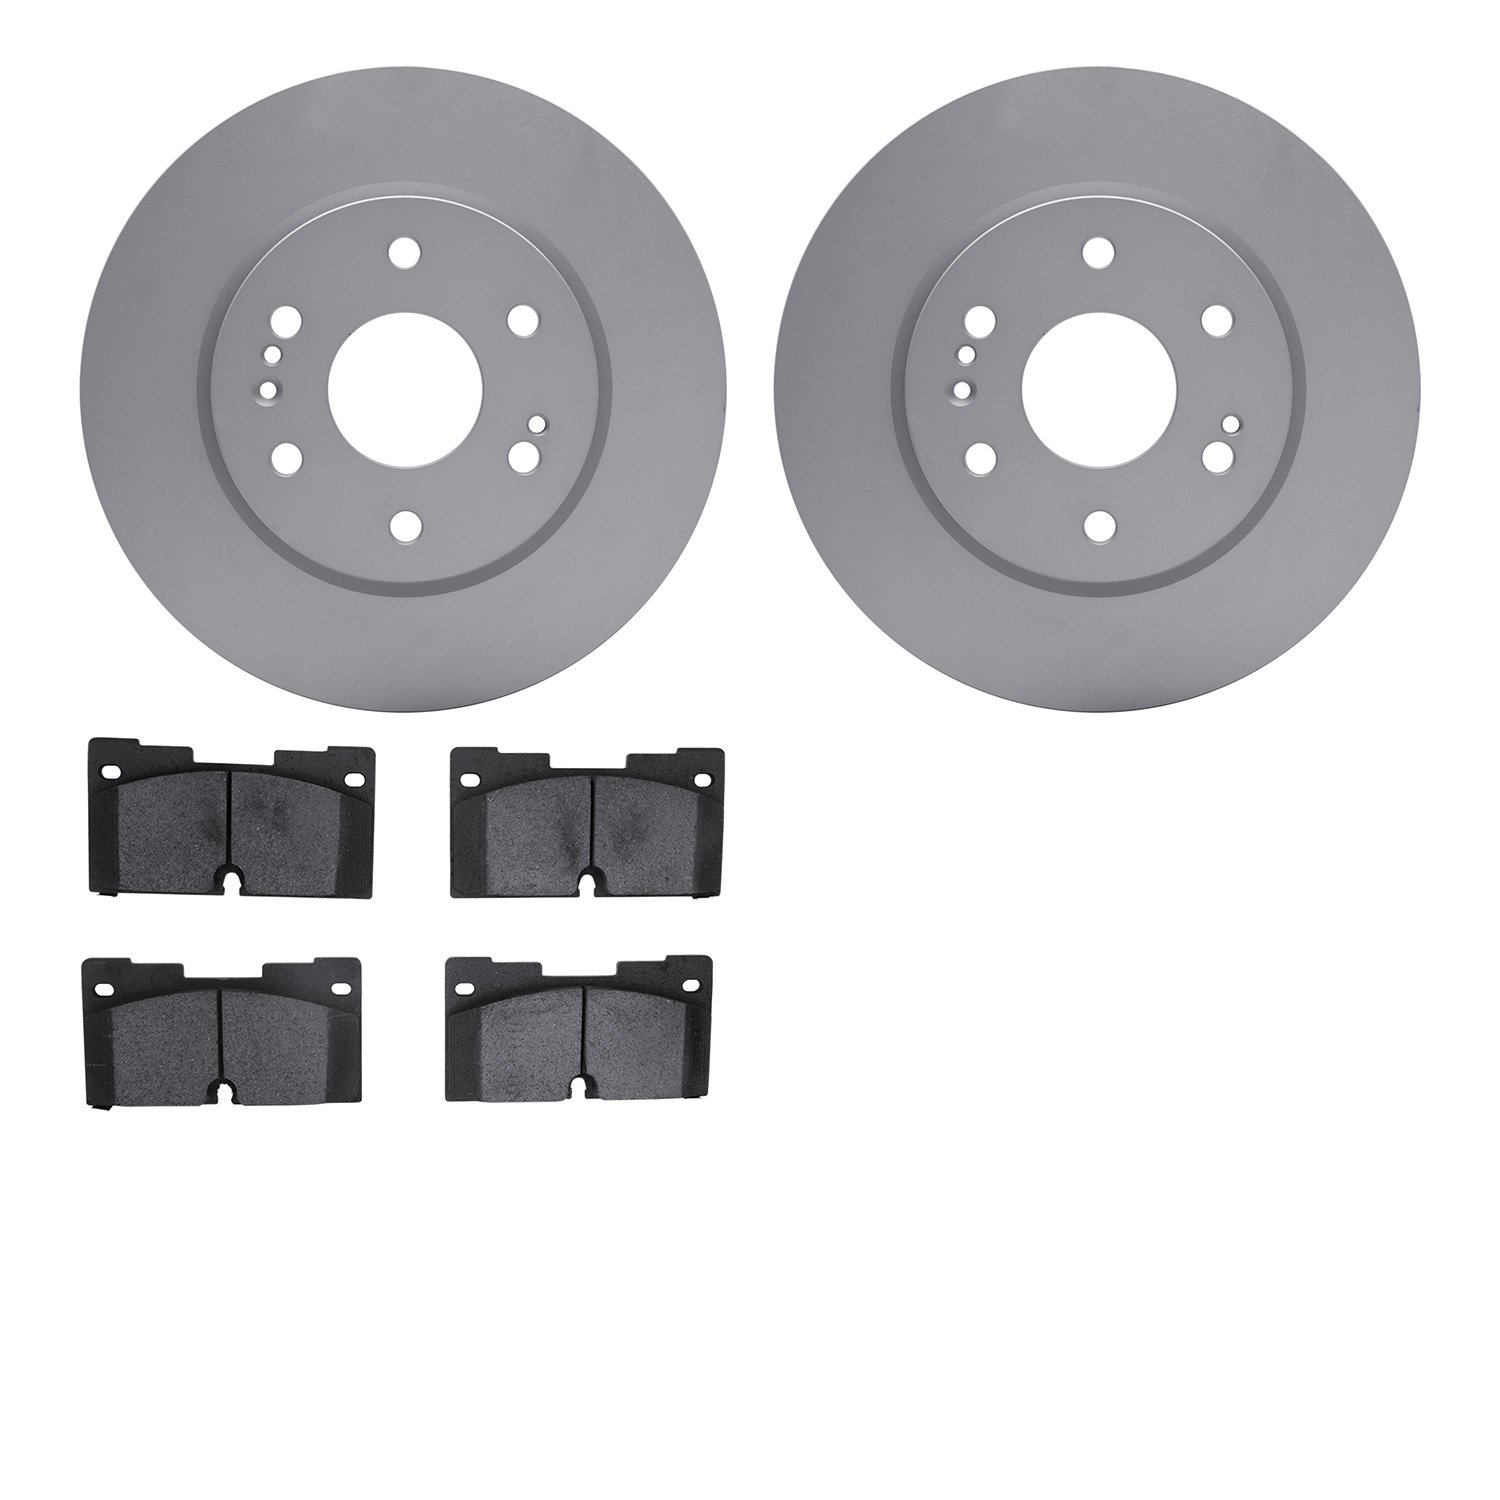 4402-47010 Geospec Brake Rotors with Ultimate-Duty Brake Pads Kit, Fits Select GM, Position: Front